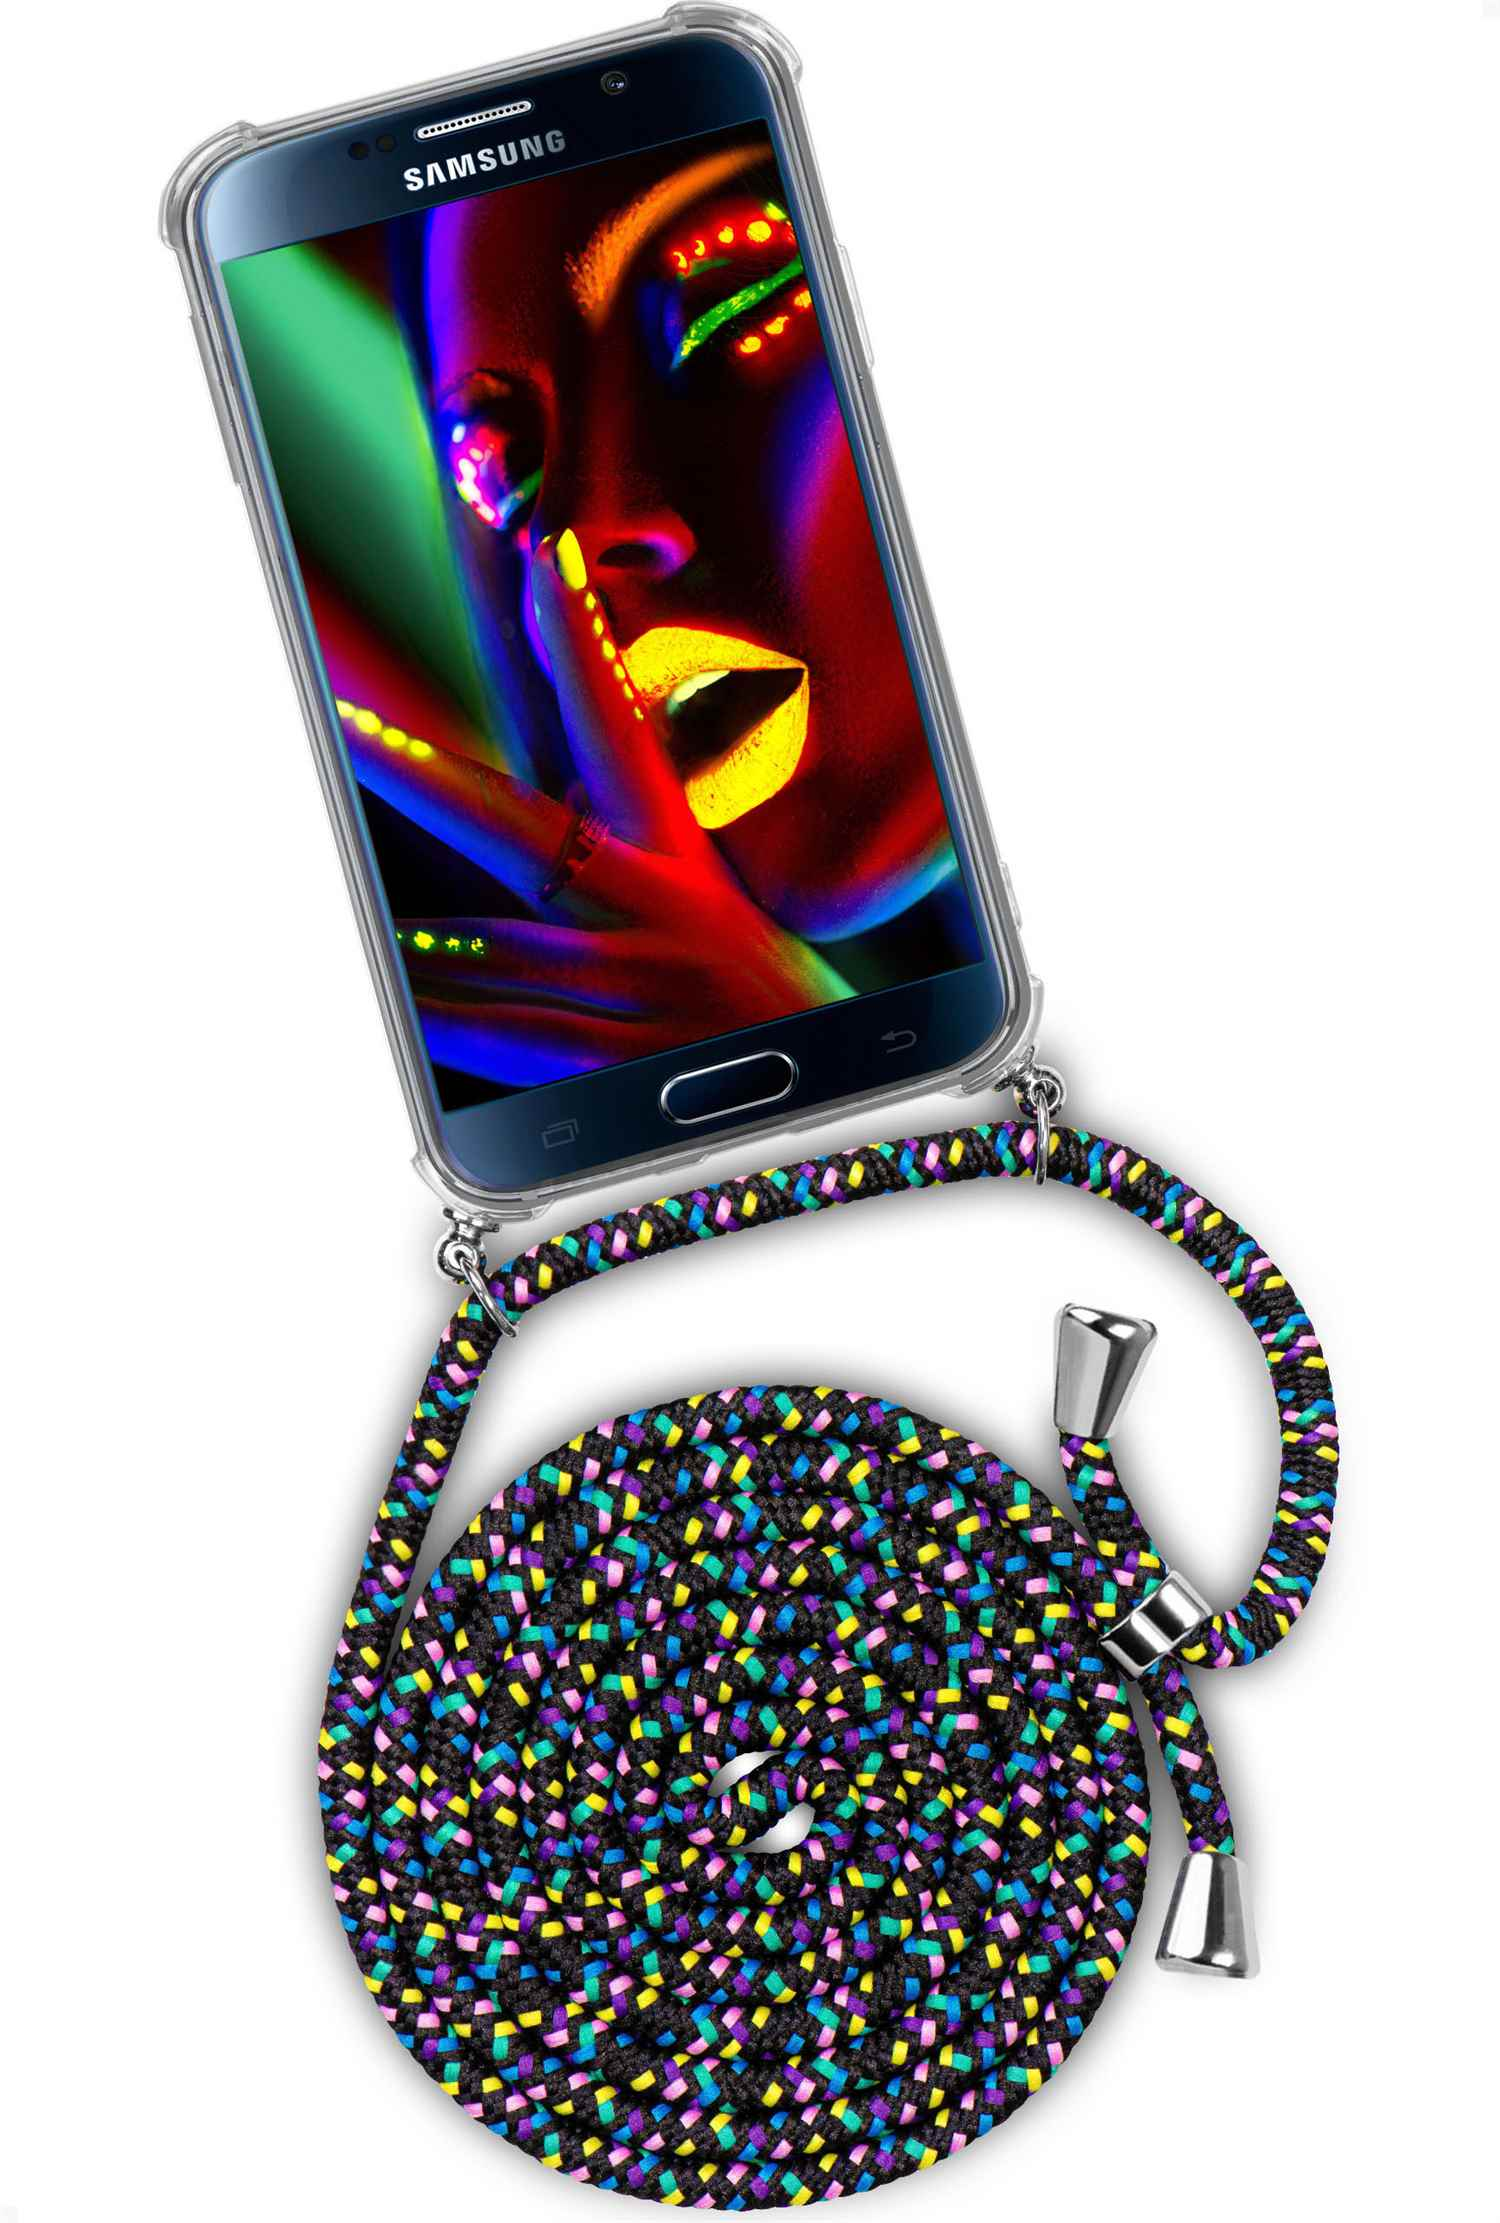 Night (Silber) Fever Galaxy Twist Case, Samsung, Backcover, S6, ONEFLOW